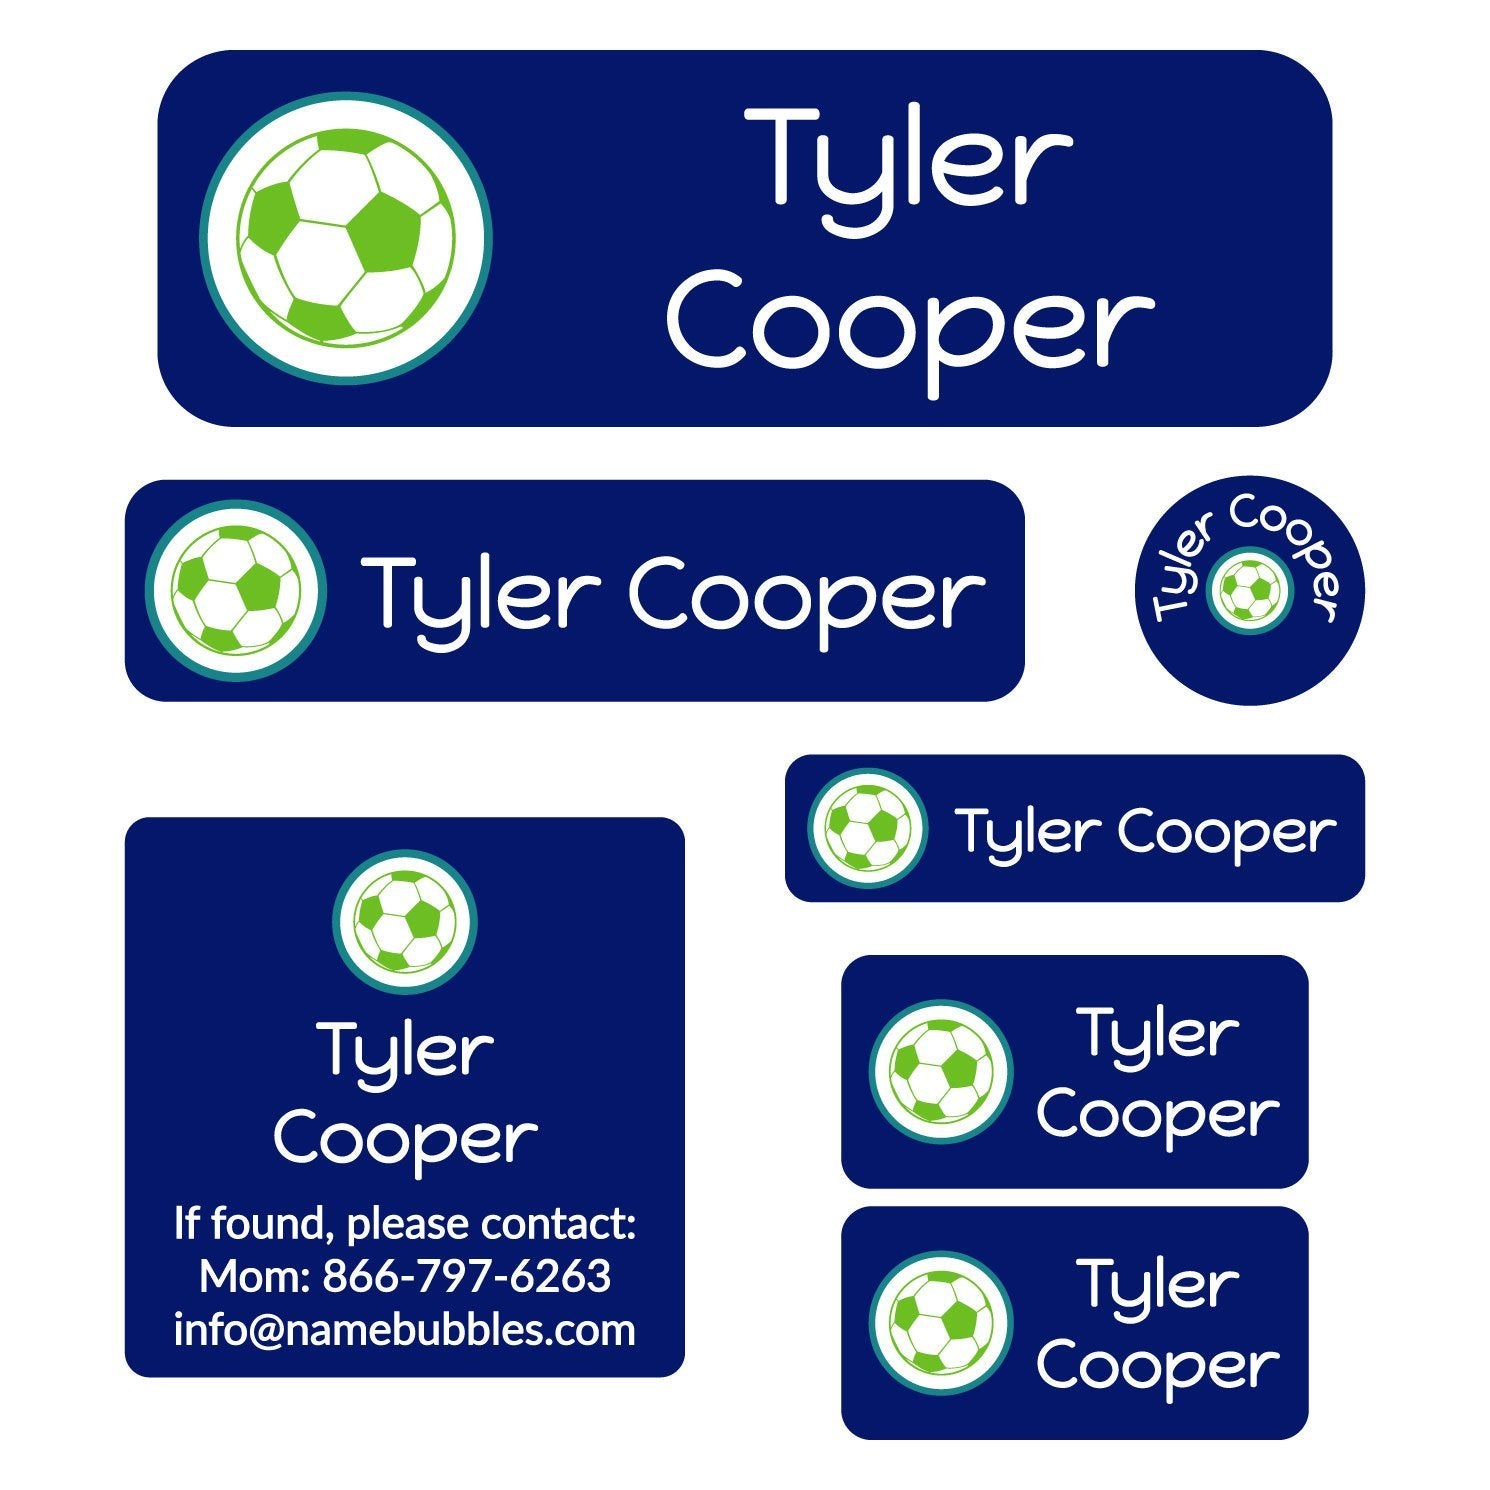 Waterproof Daycare Labels Preschool Labels Name Stickers School Supply  Labels Name Labels for School Supplies 